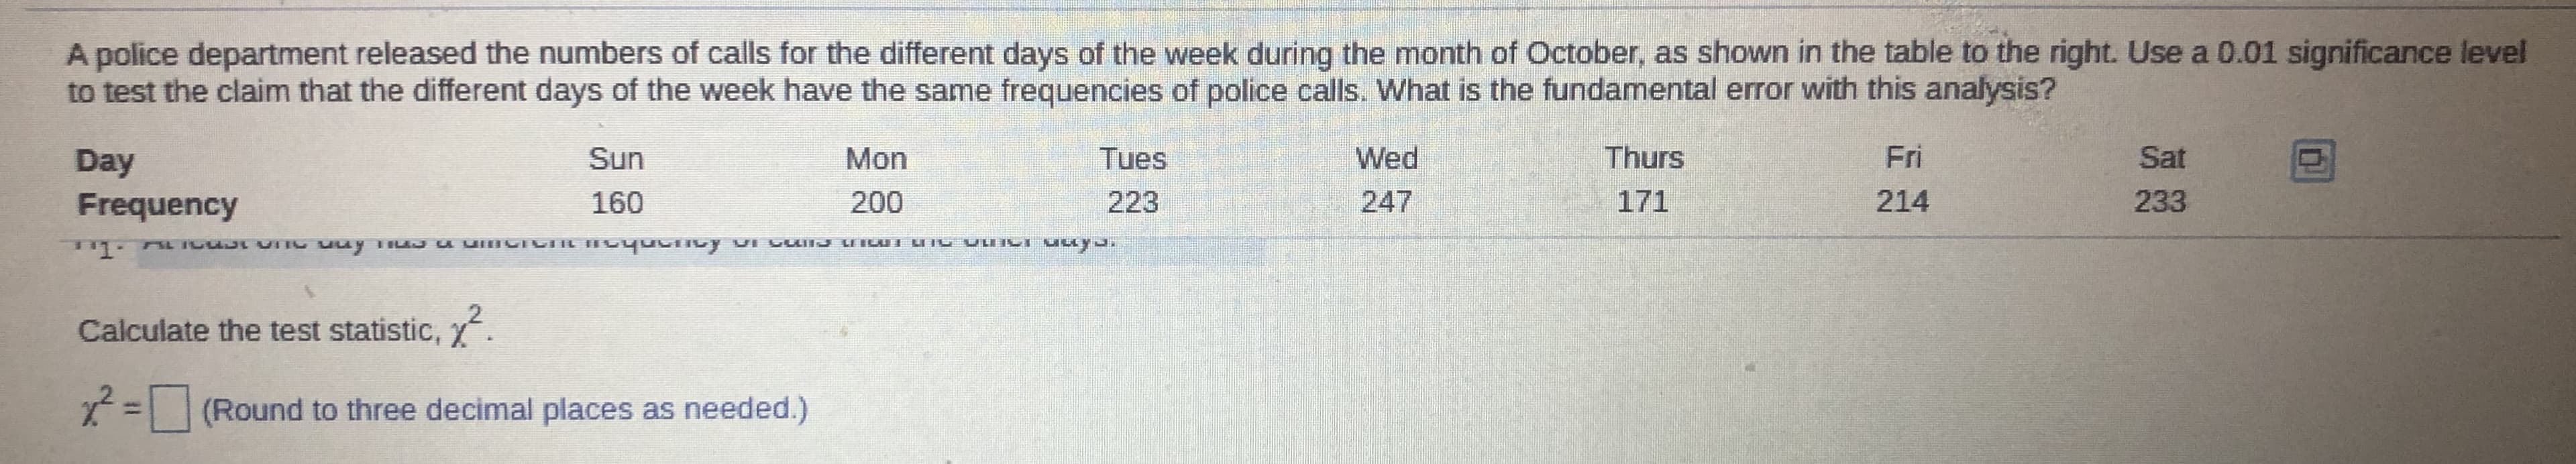 A police department released the numbers of calls for the different days of the week during the month of October, as shown in the table to the right. Use a 0.01 significance level
to test the claim that the different days of the week have the same frequencies of police calls. What is the fundamental error with this analysis?
Day
Sun
Mon
Tues
Wed
Thurs
Fri
Sat
Frequency
160
200
223
247
171
214
233
Calculate the test statistic, .
= (Round to three decimal places as needed.)
